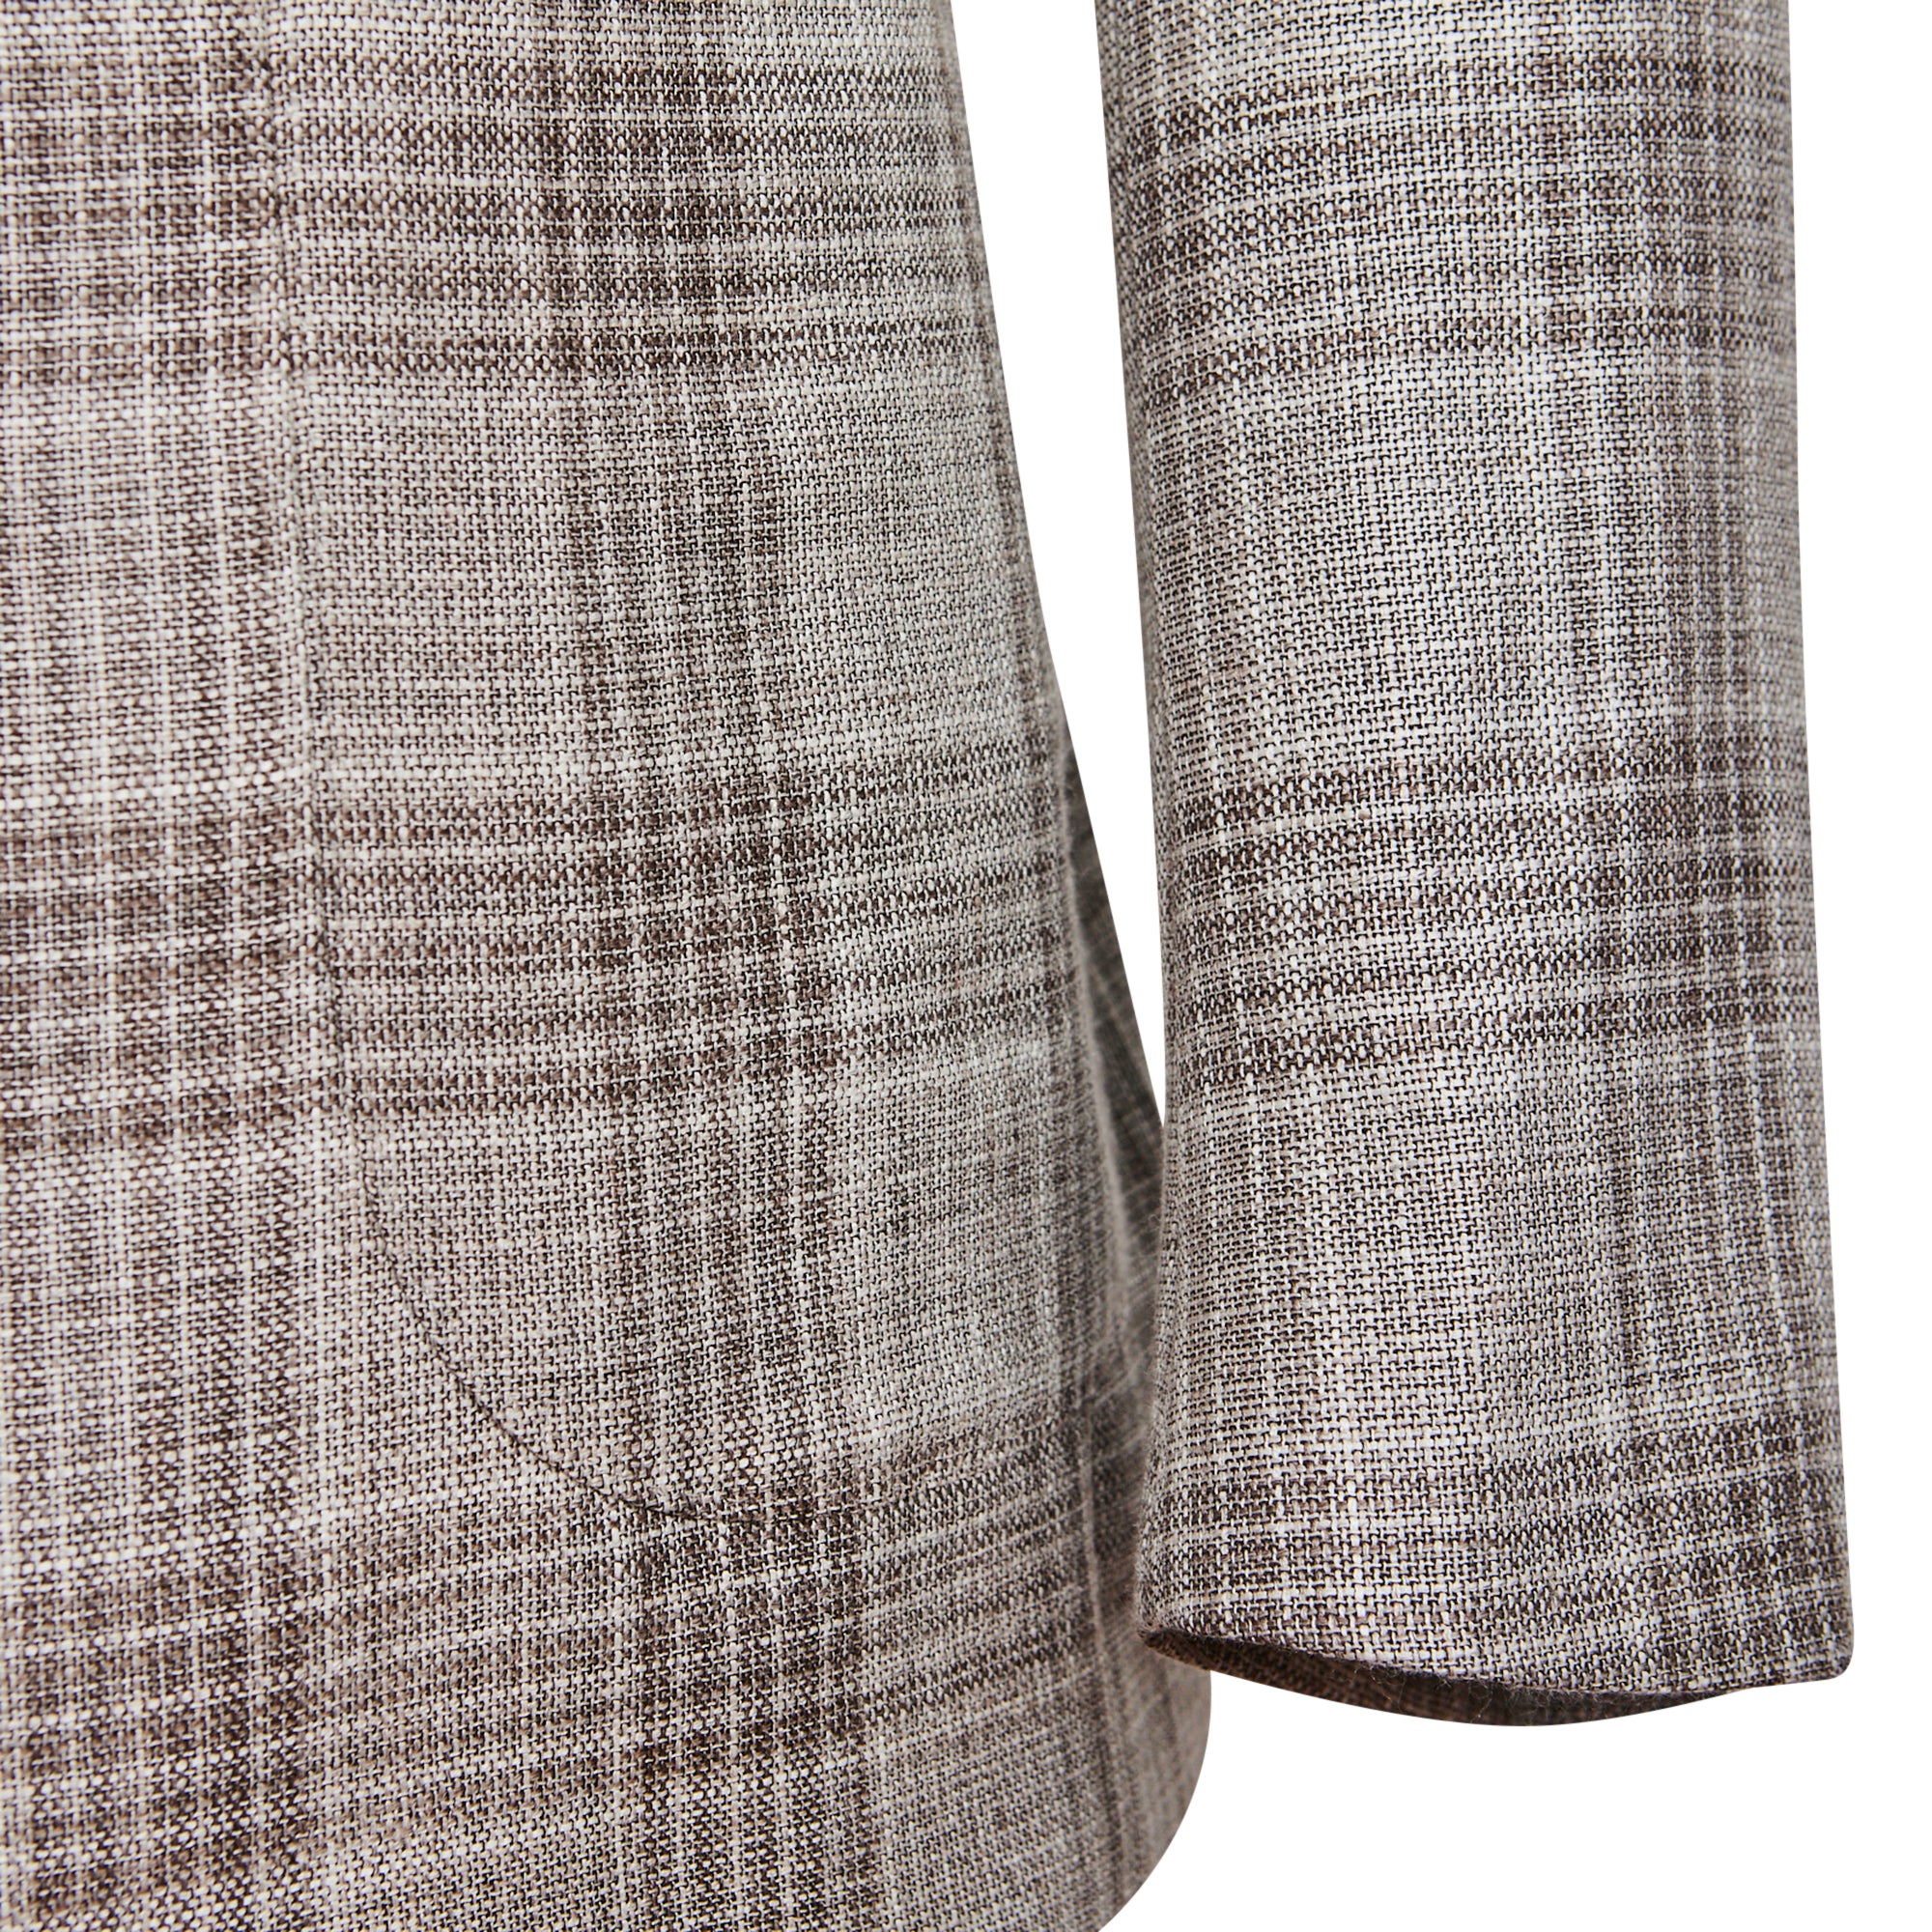 Medici Blazer - Taupe Wool, Silk & Linen with Brown Check